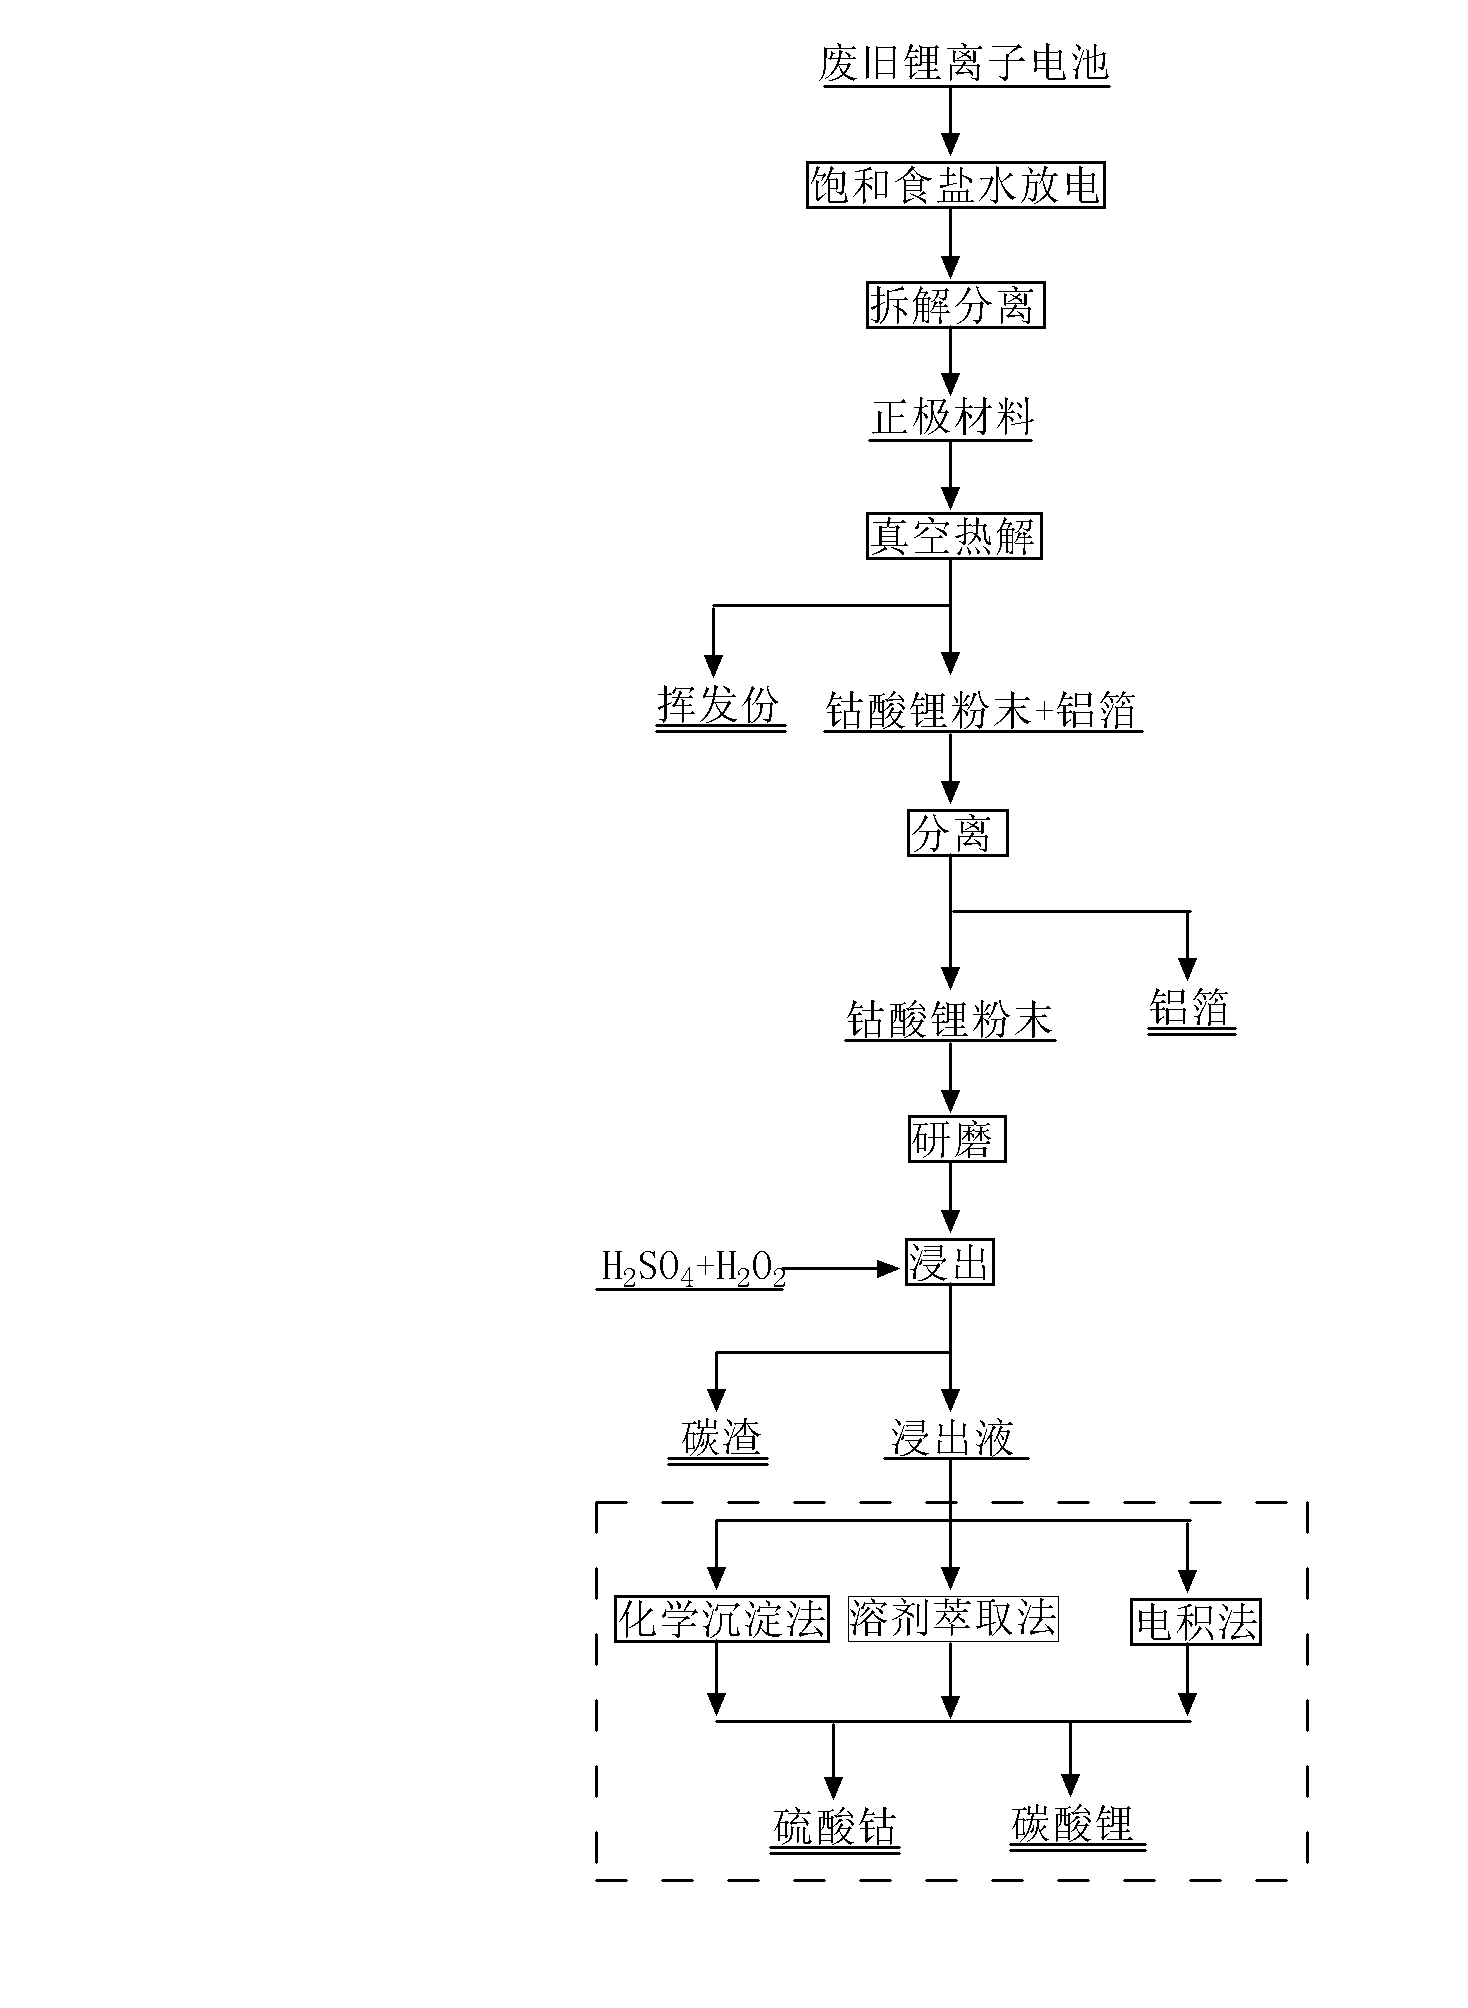 Pretreatment method for recovering valuable metal from anode material of waste lithium ion battery